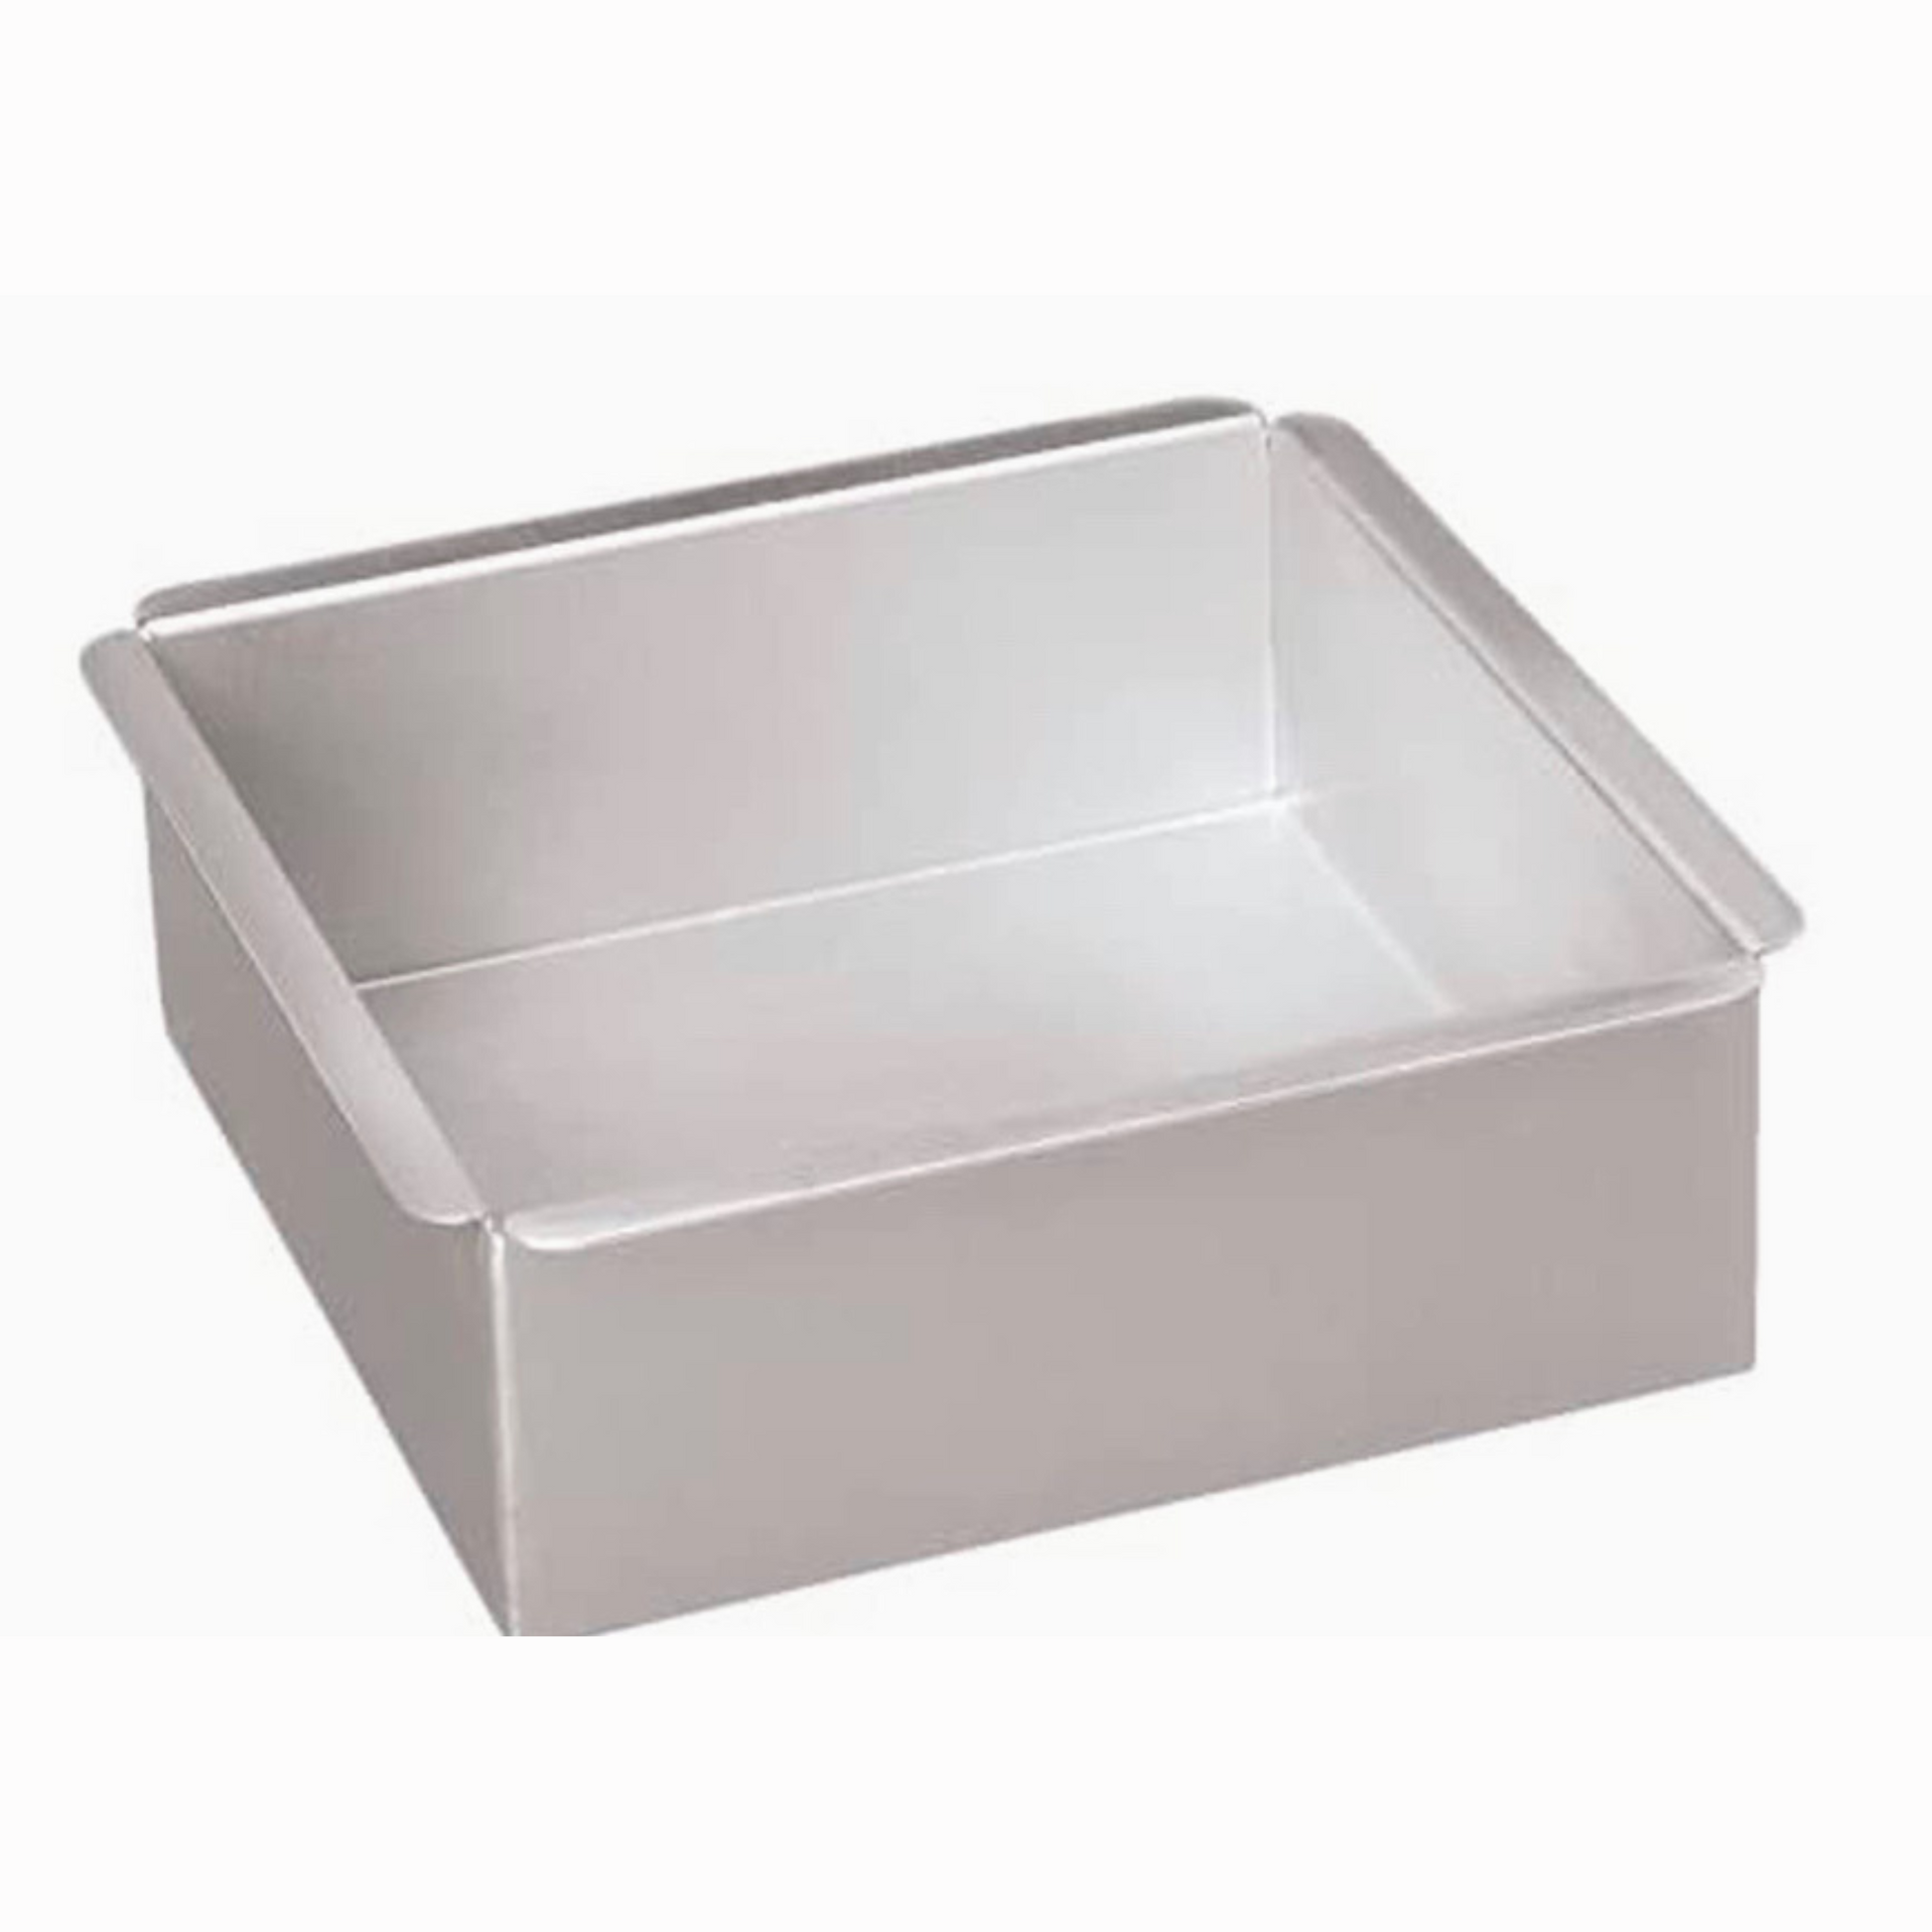 Magic Line Rectangle Cake Pan - Oblong Aluminum Cake Pans for Home &  Professional Baking (9x13x2 Inches)